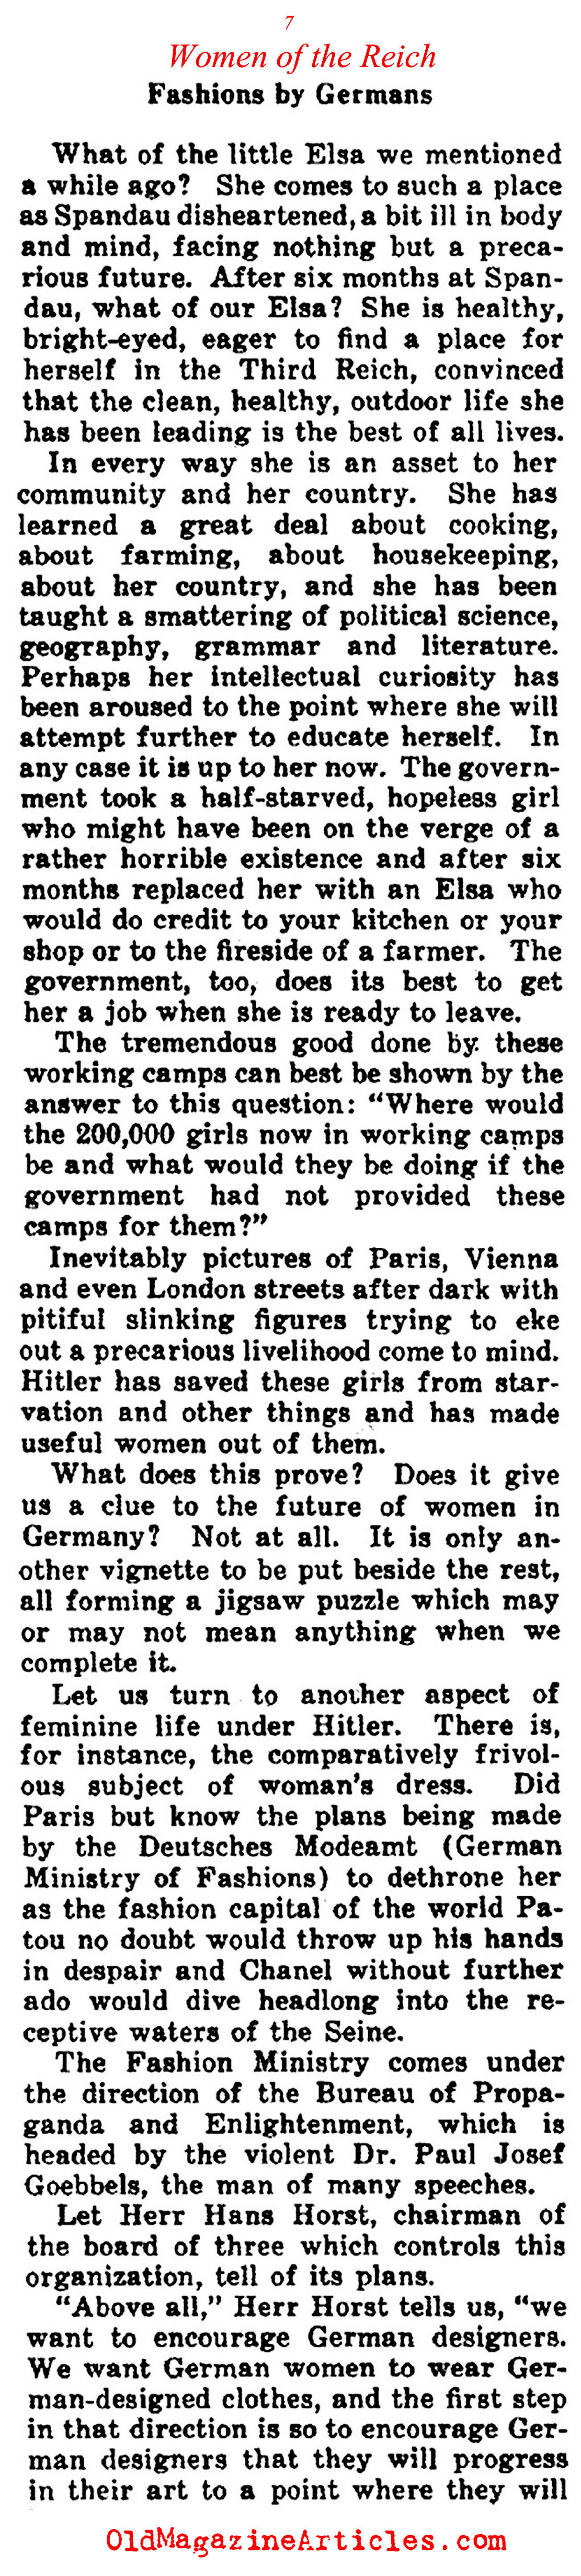 A Woman's Place Within the Third Reich (Collier's Magazine, 1933)